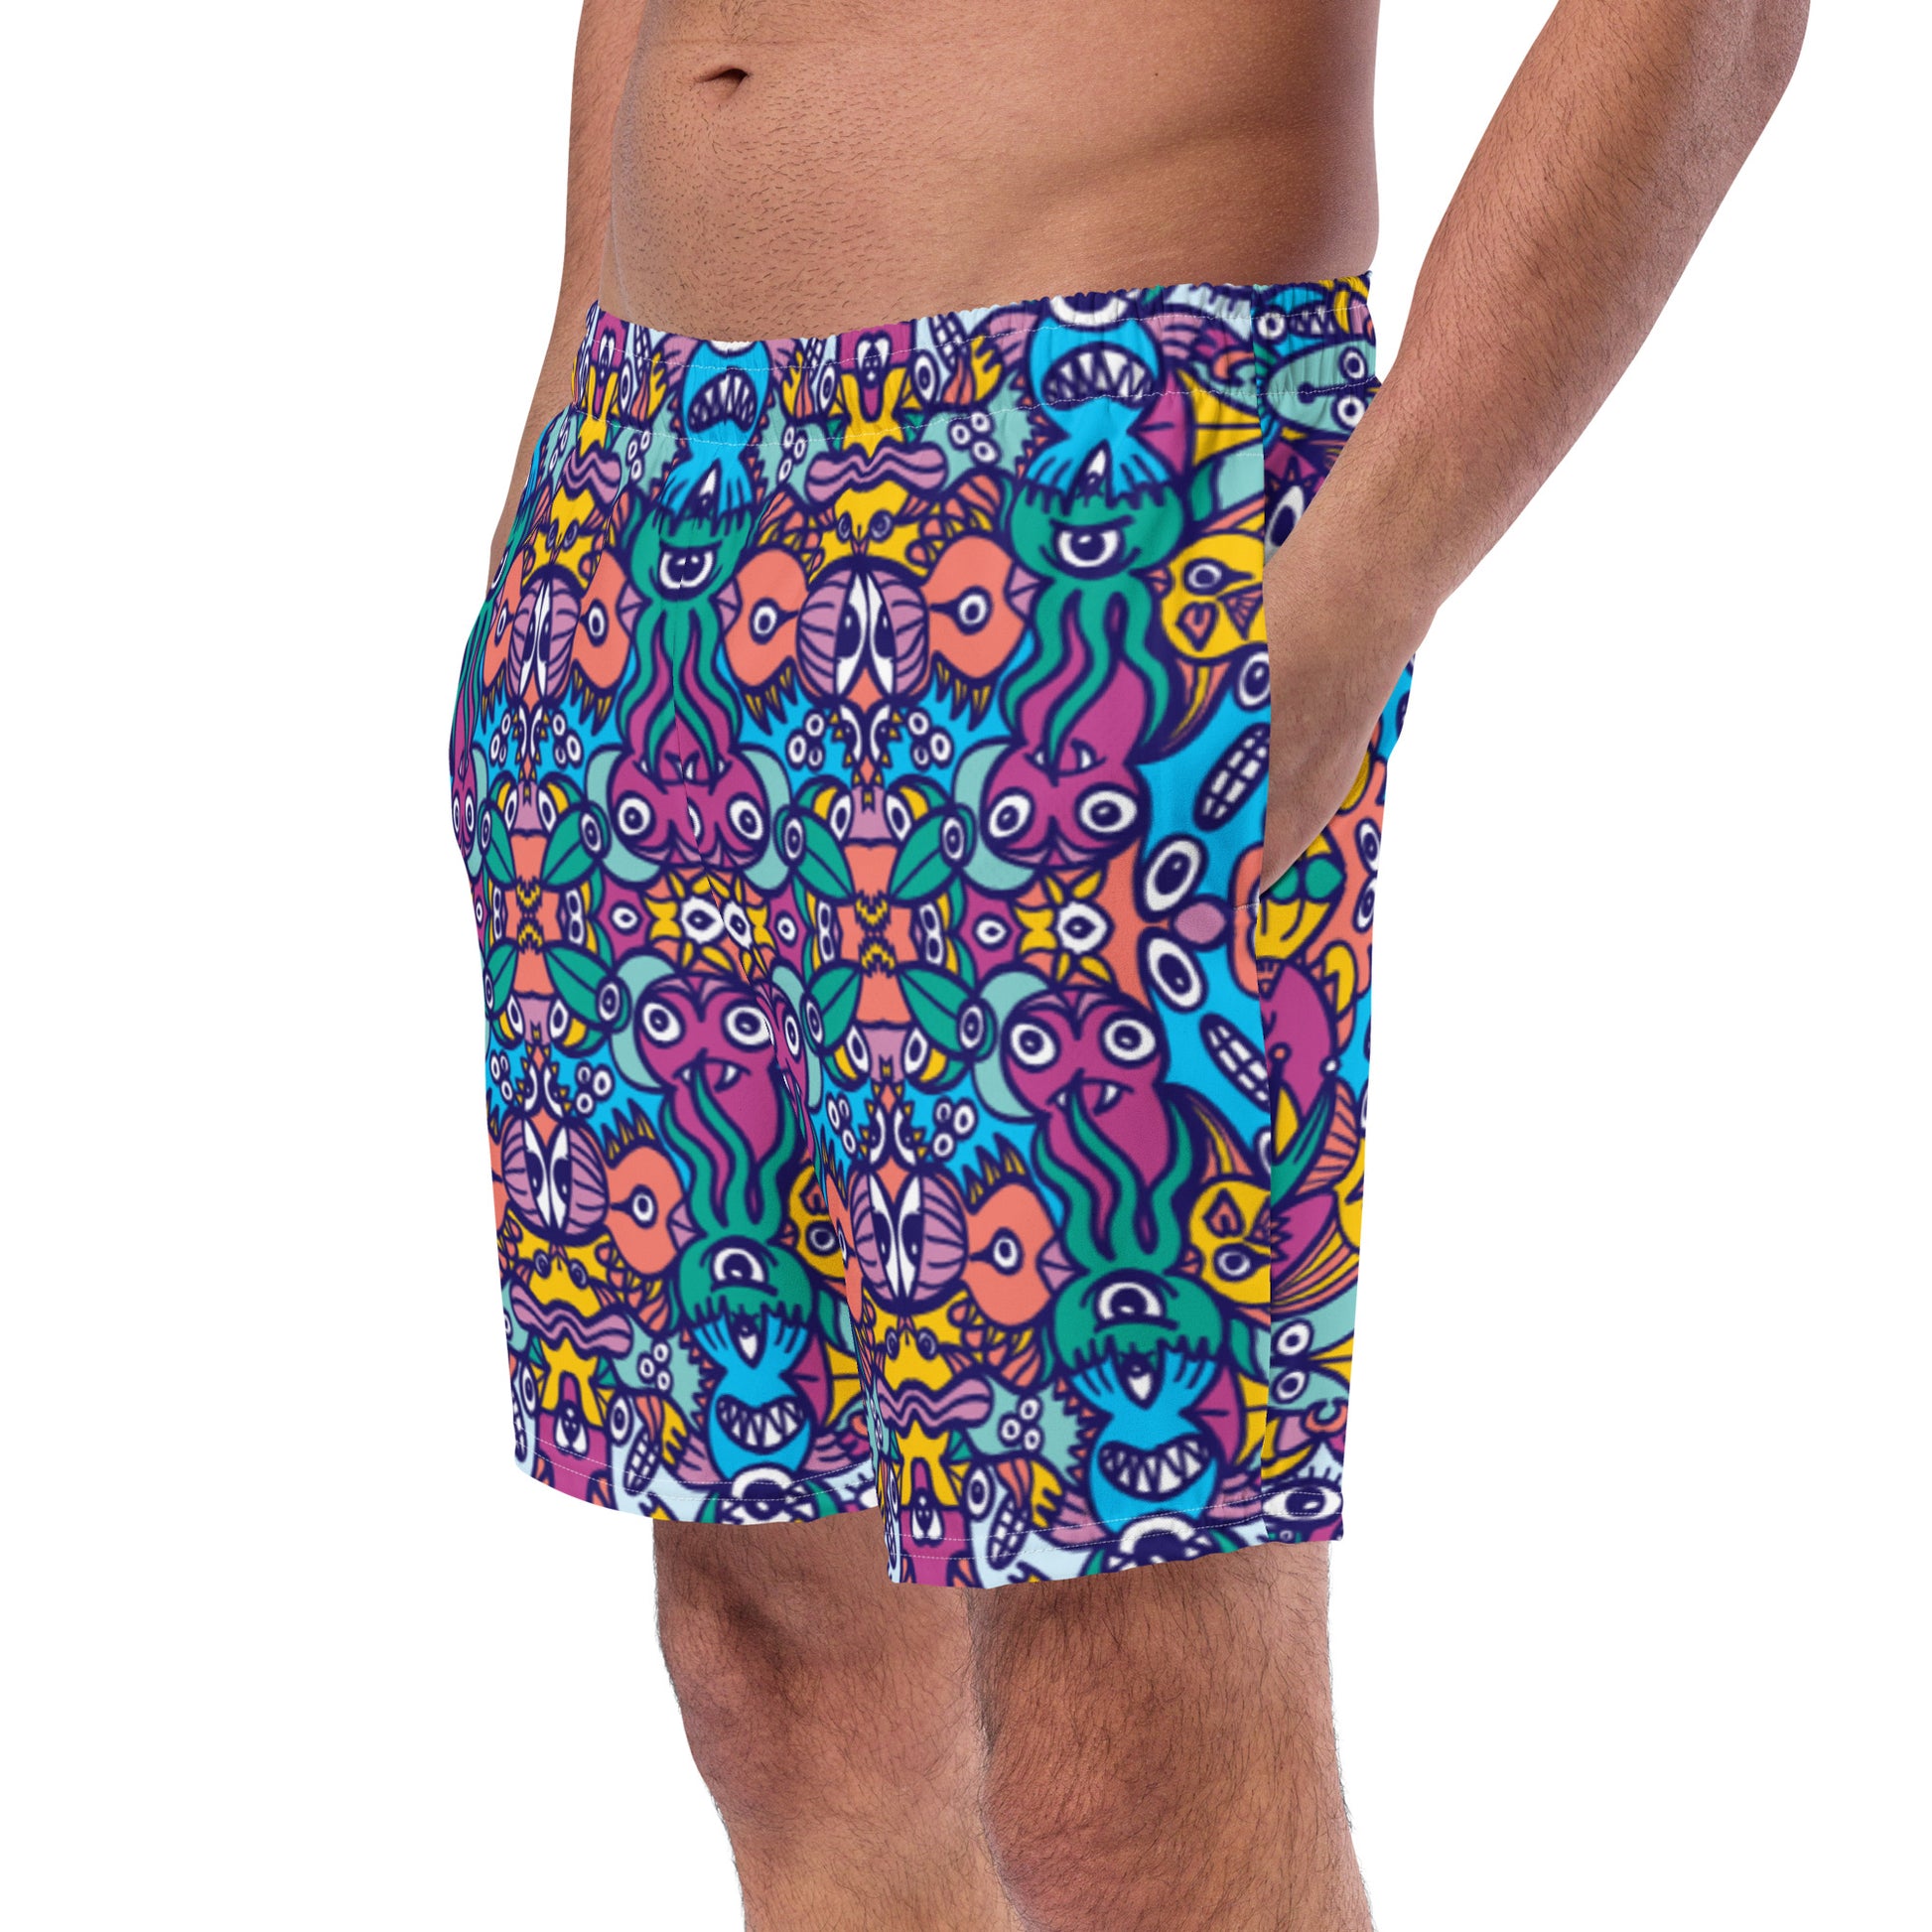 Whimsical design featuring multicolor critters from another world Men's swim trunks. Overview